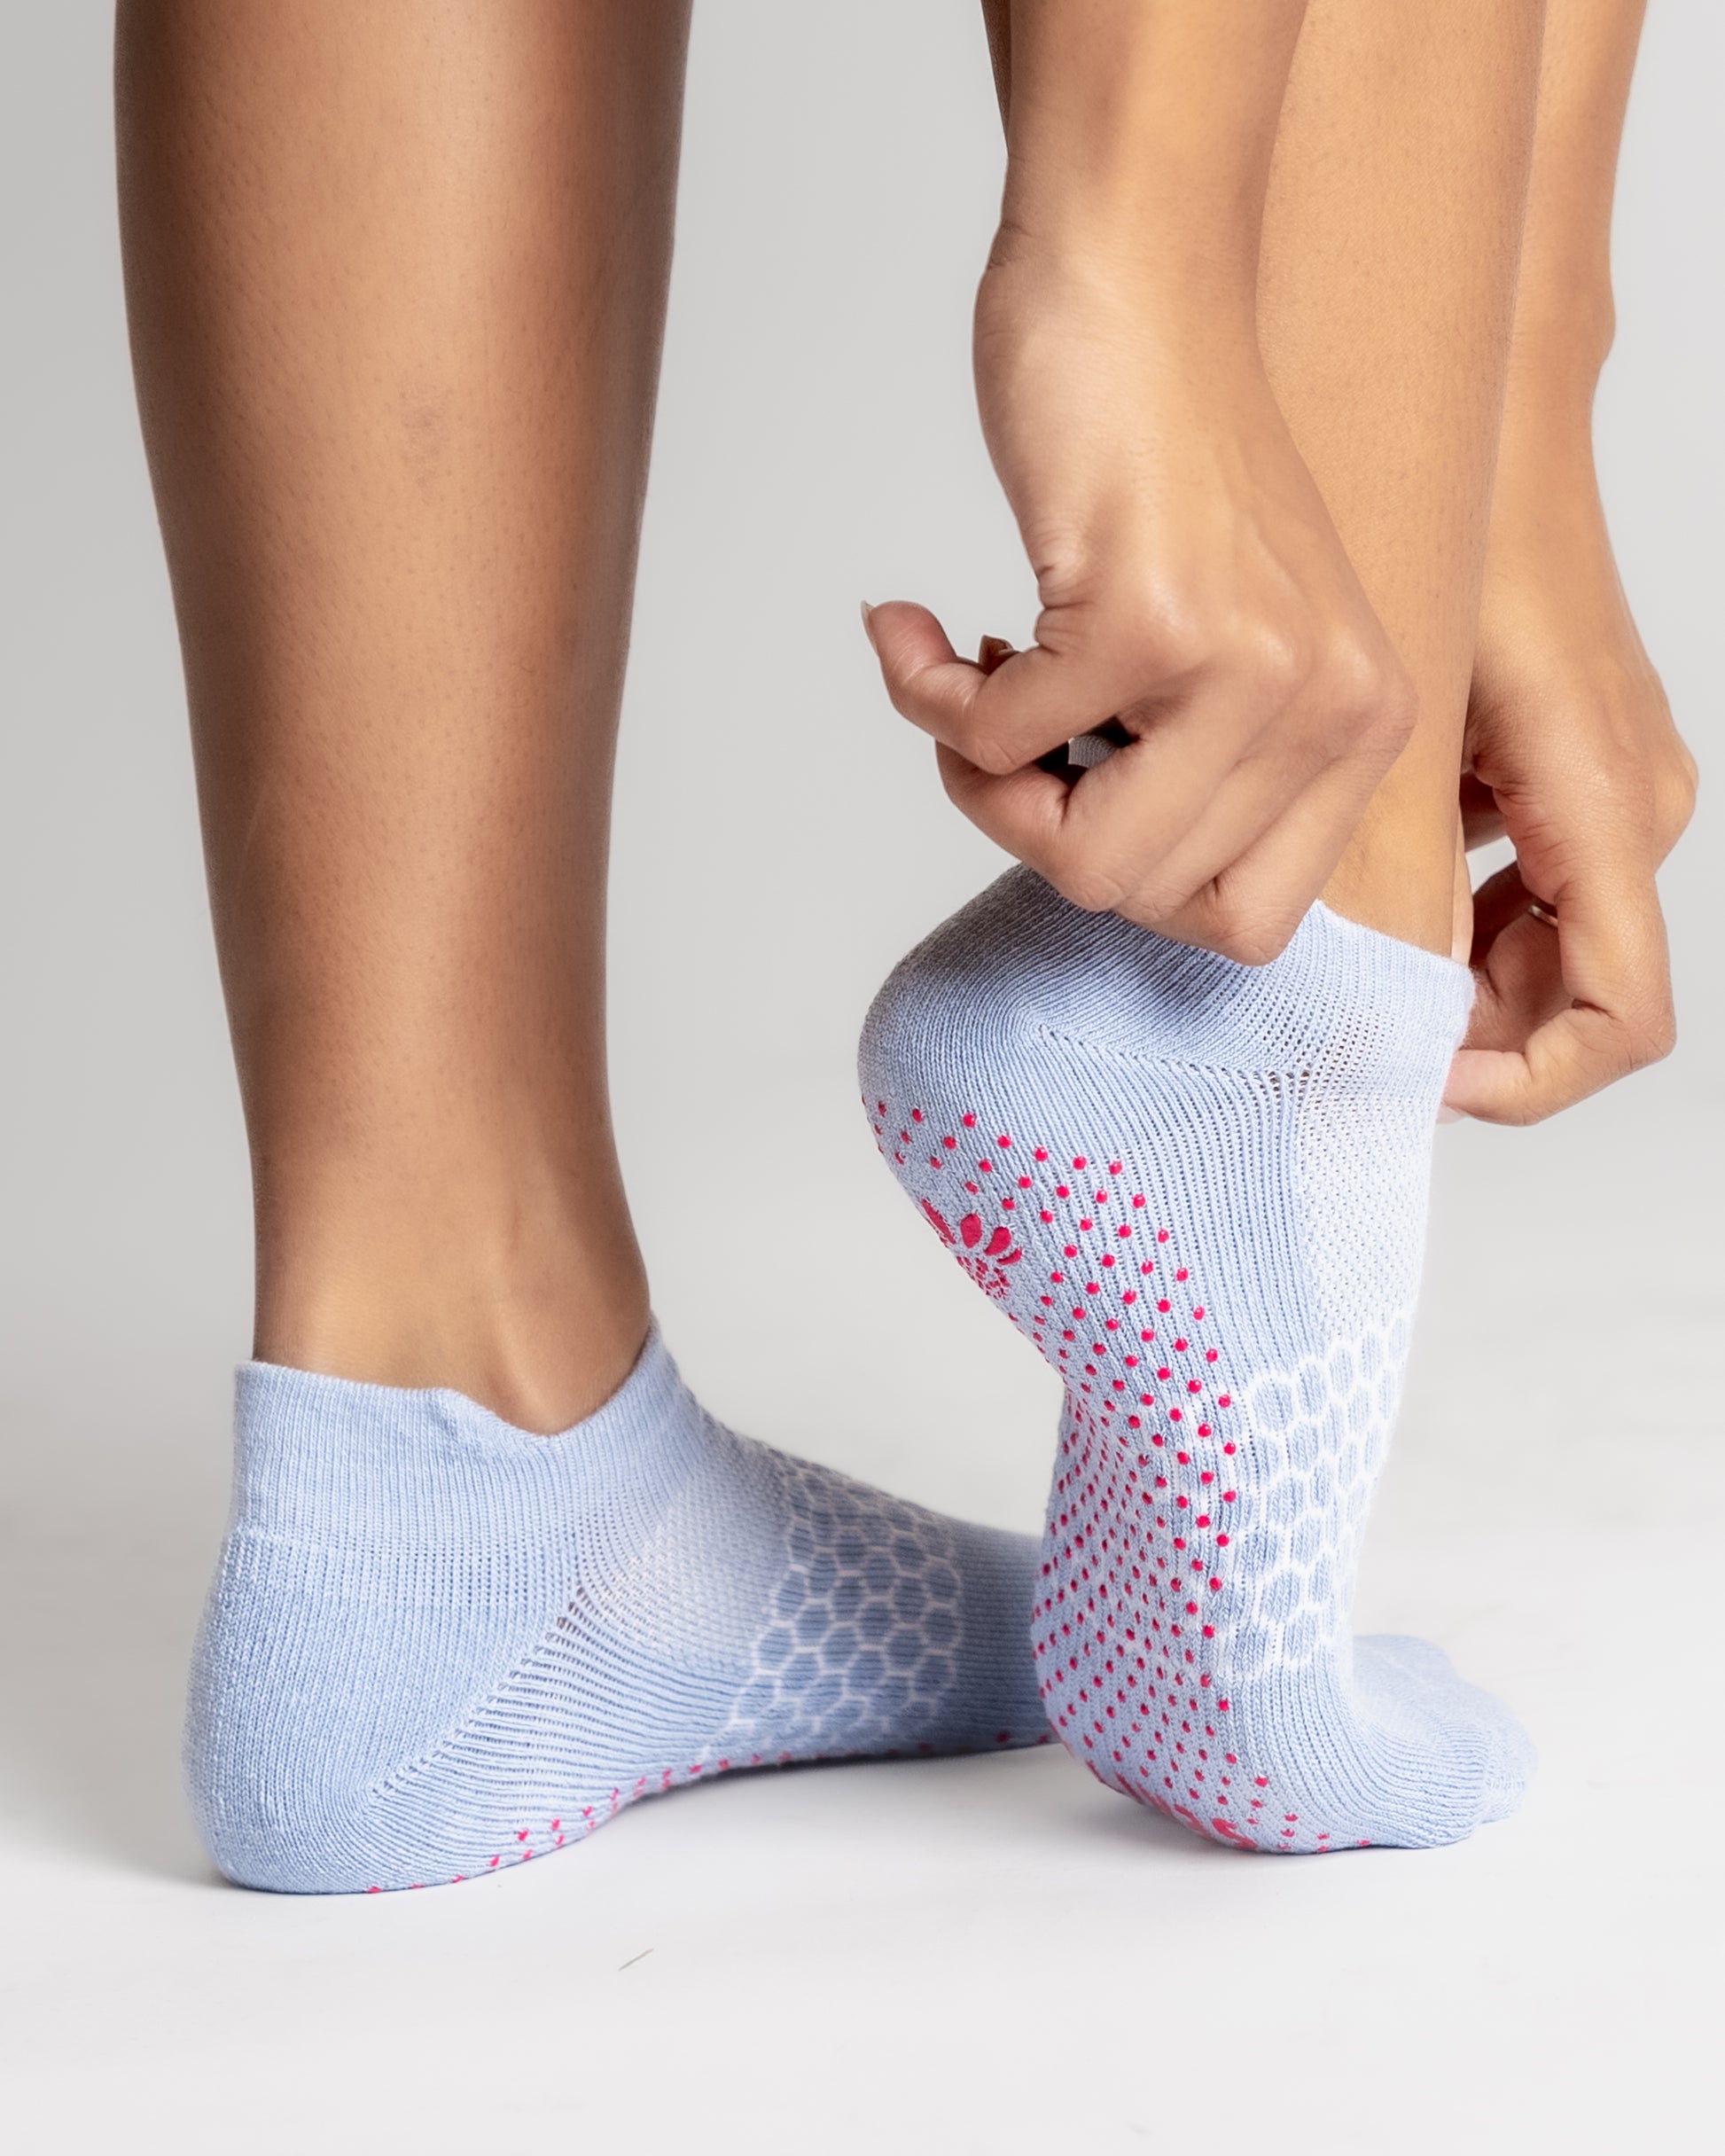 Up To 70% Off on Non Slip Socks with Grips for